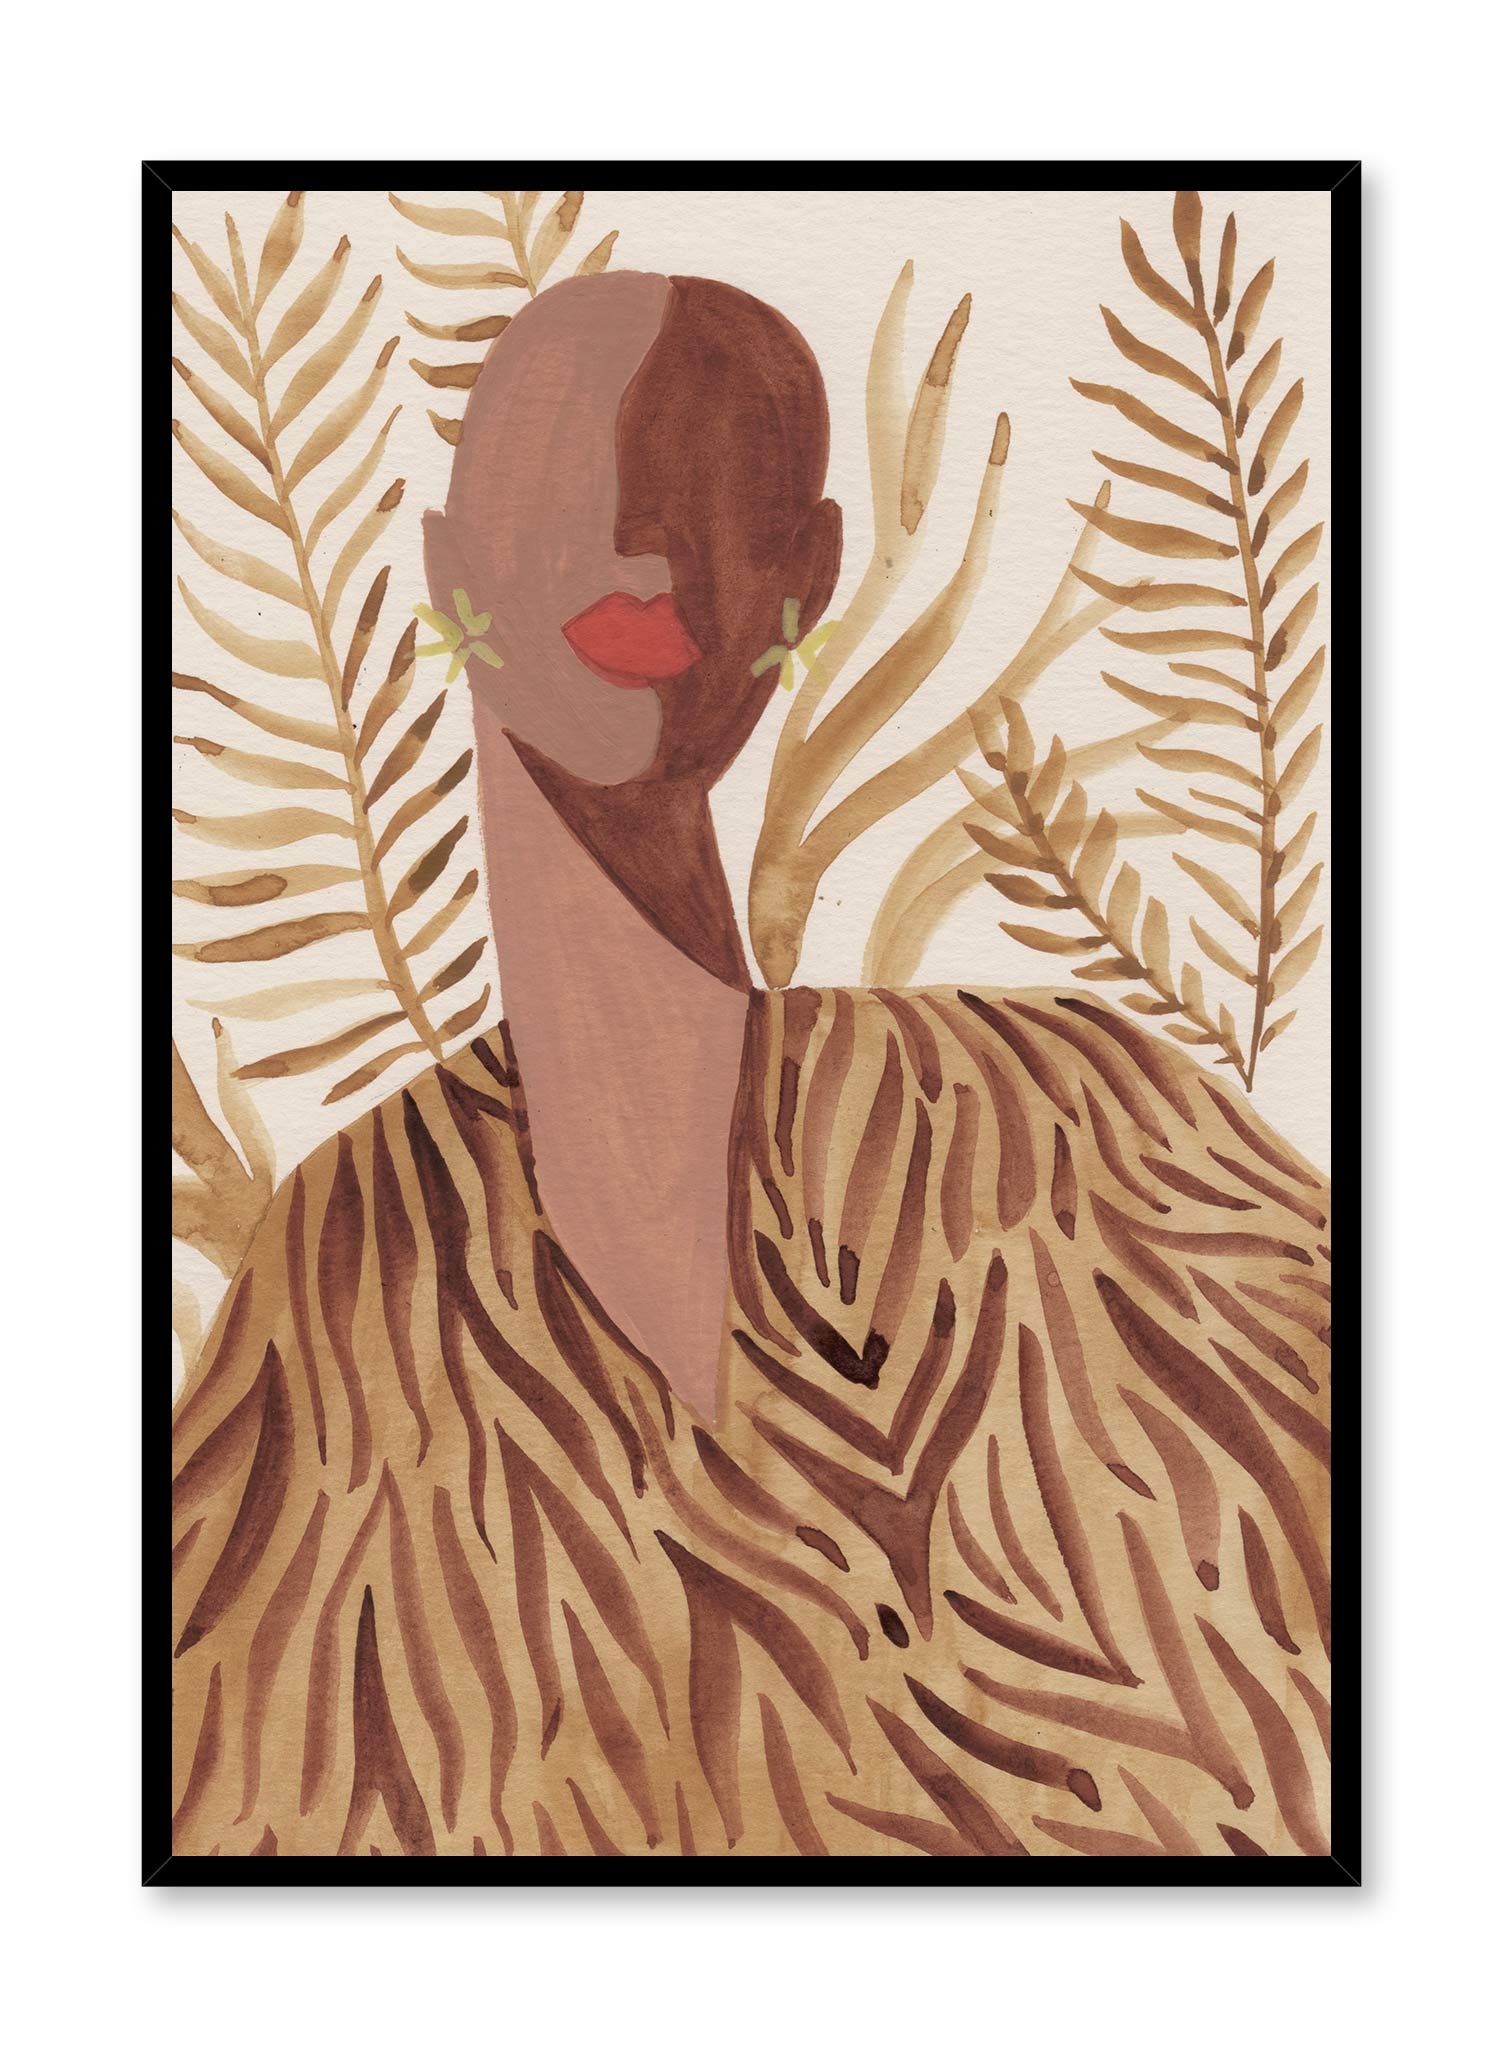 Sharifa is a minimalist illustration of a confident woman rocking her animal print outfit with parlor palm leaves as decor by Opposite Wall.